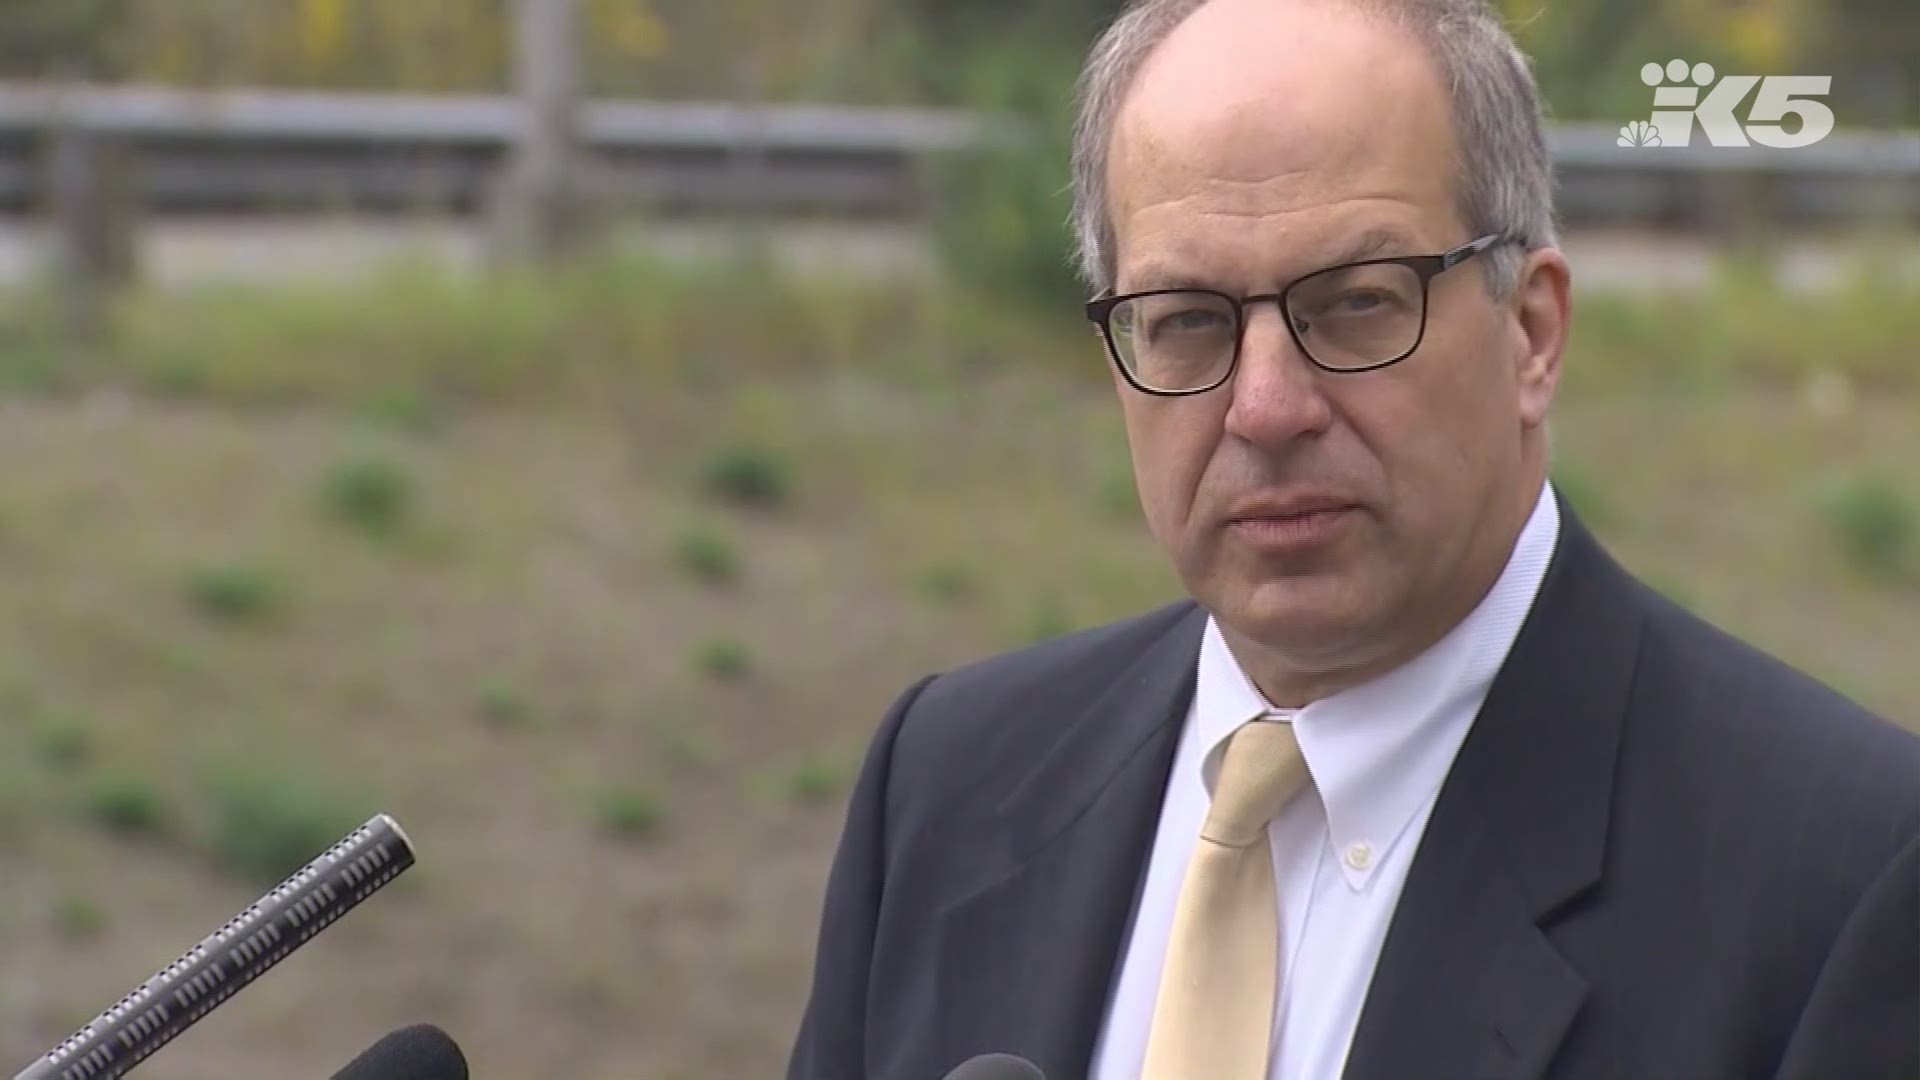 Following the release of the NTSB's findings into the deadly 2017 Amtrak train derailment in DuPont, Washington state Senator Steve O'Ban is calling for better oversight of Sound Transit and the state DOT as they move forward on future rail projects.